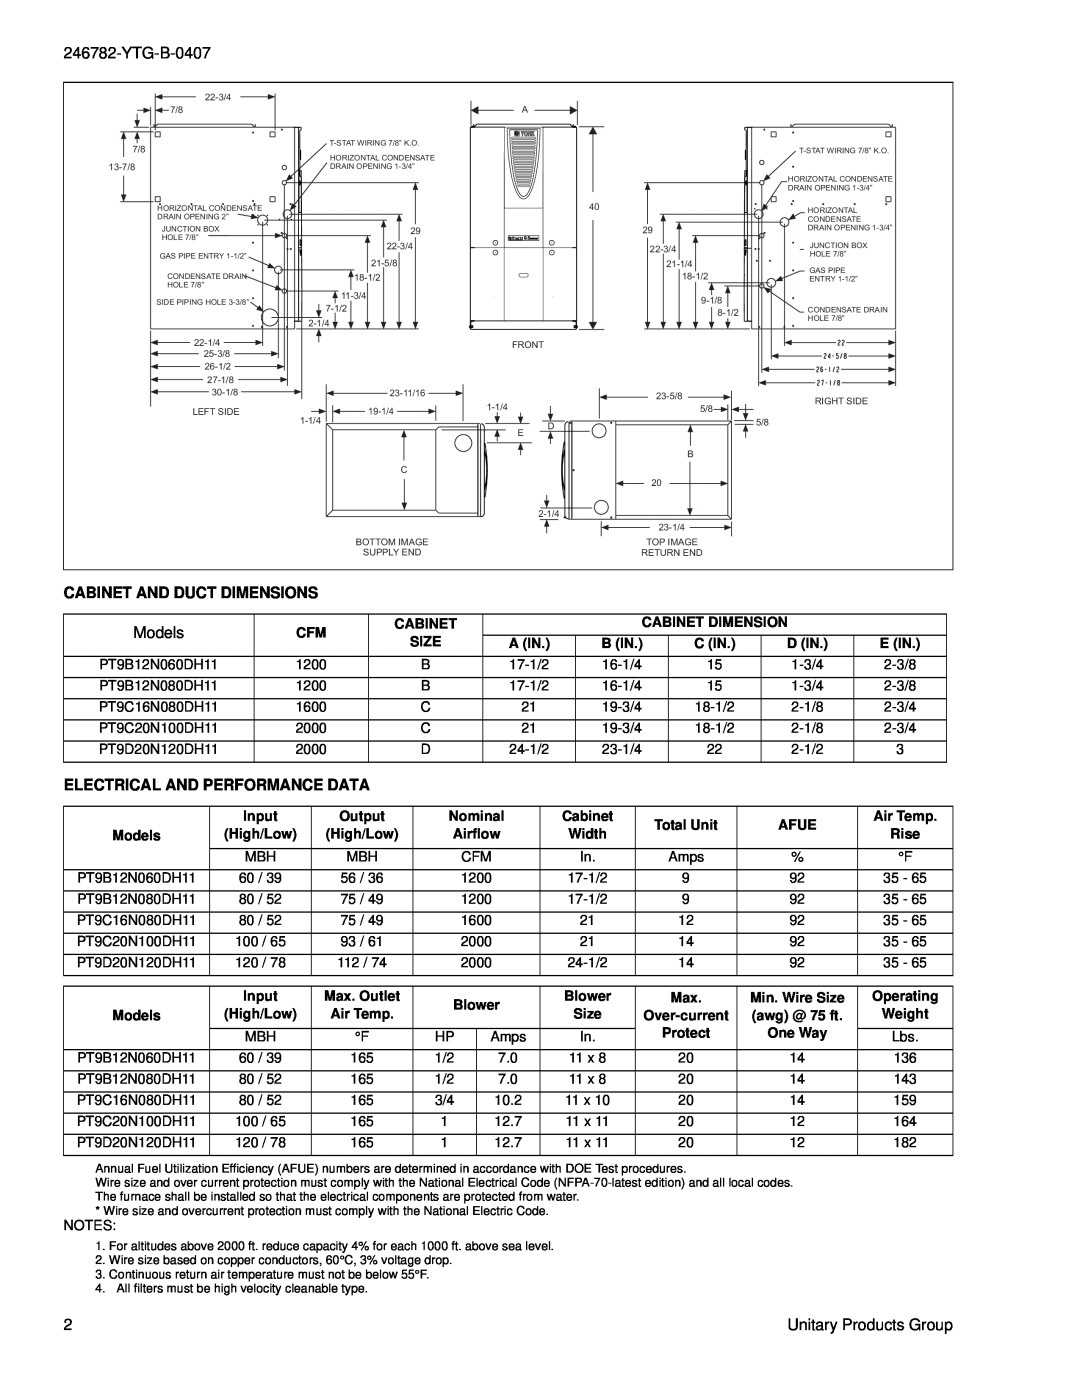 York PT9 warranty YTG-B-0407, Cabinet And Duct Dimensions, Electrical And Performance Data 